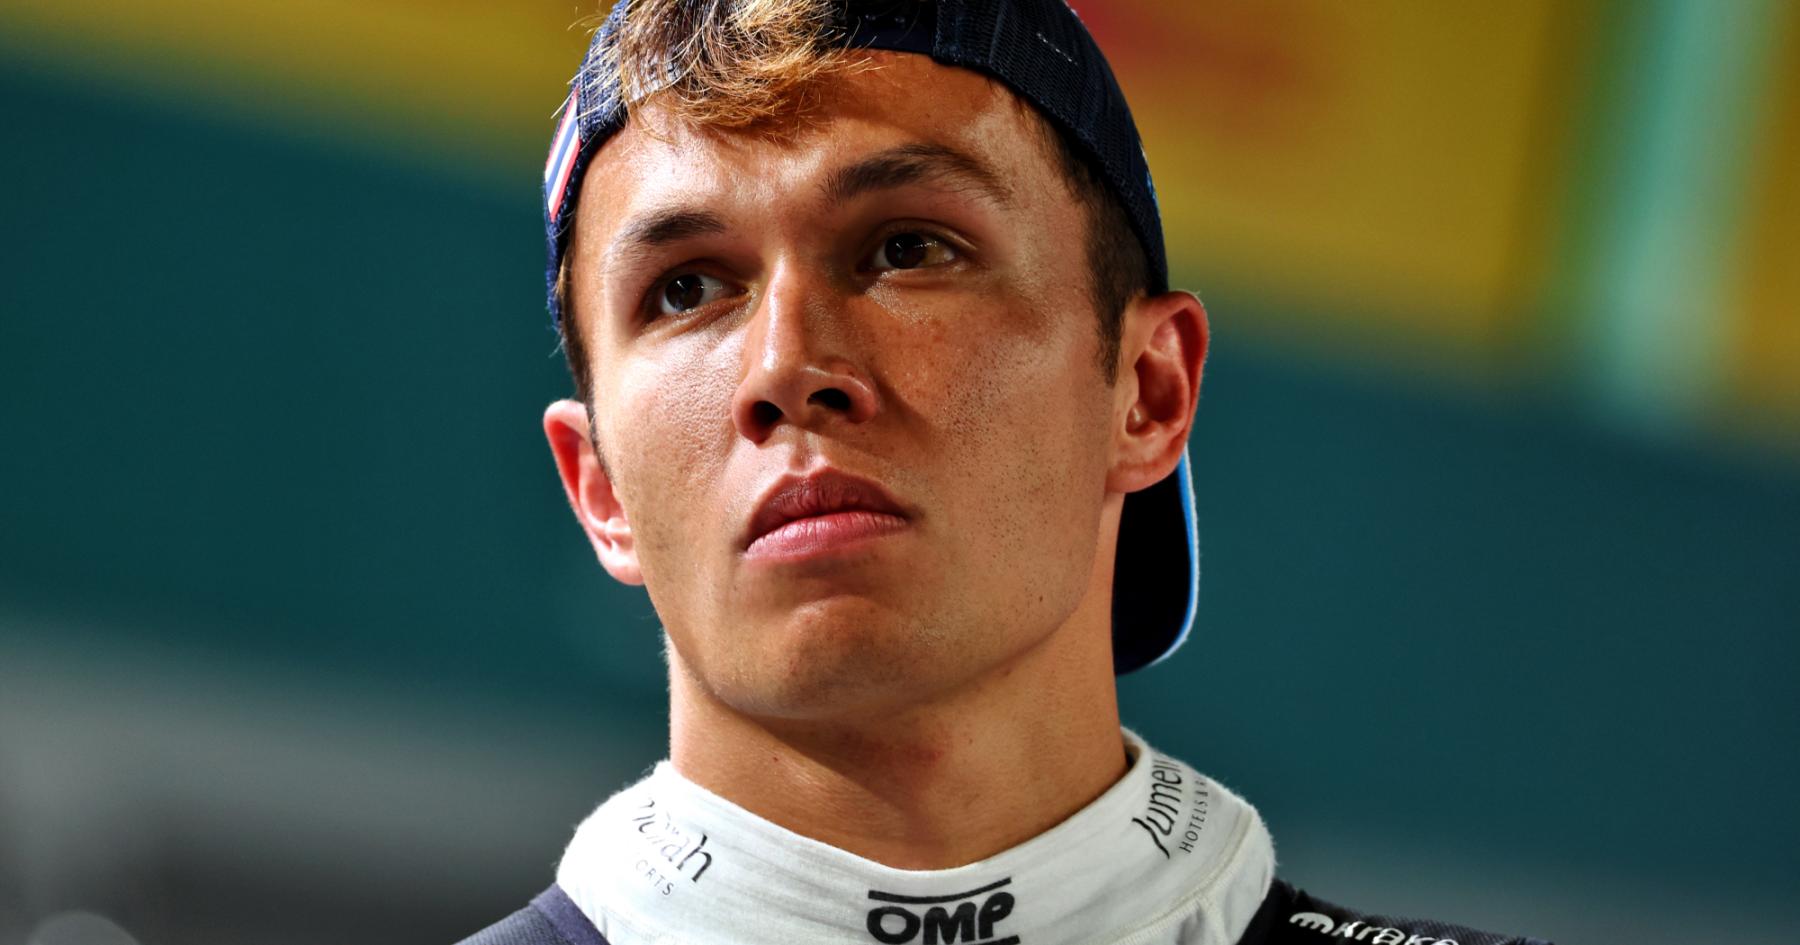 Albon Urges Williams to Transform Car DNA Amidst Inherent Issues